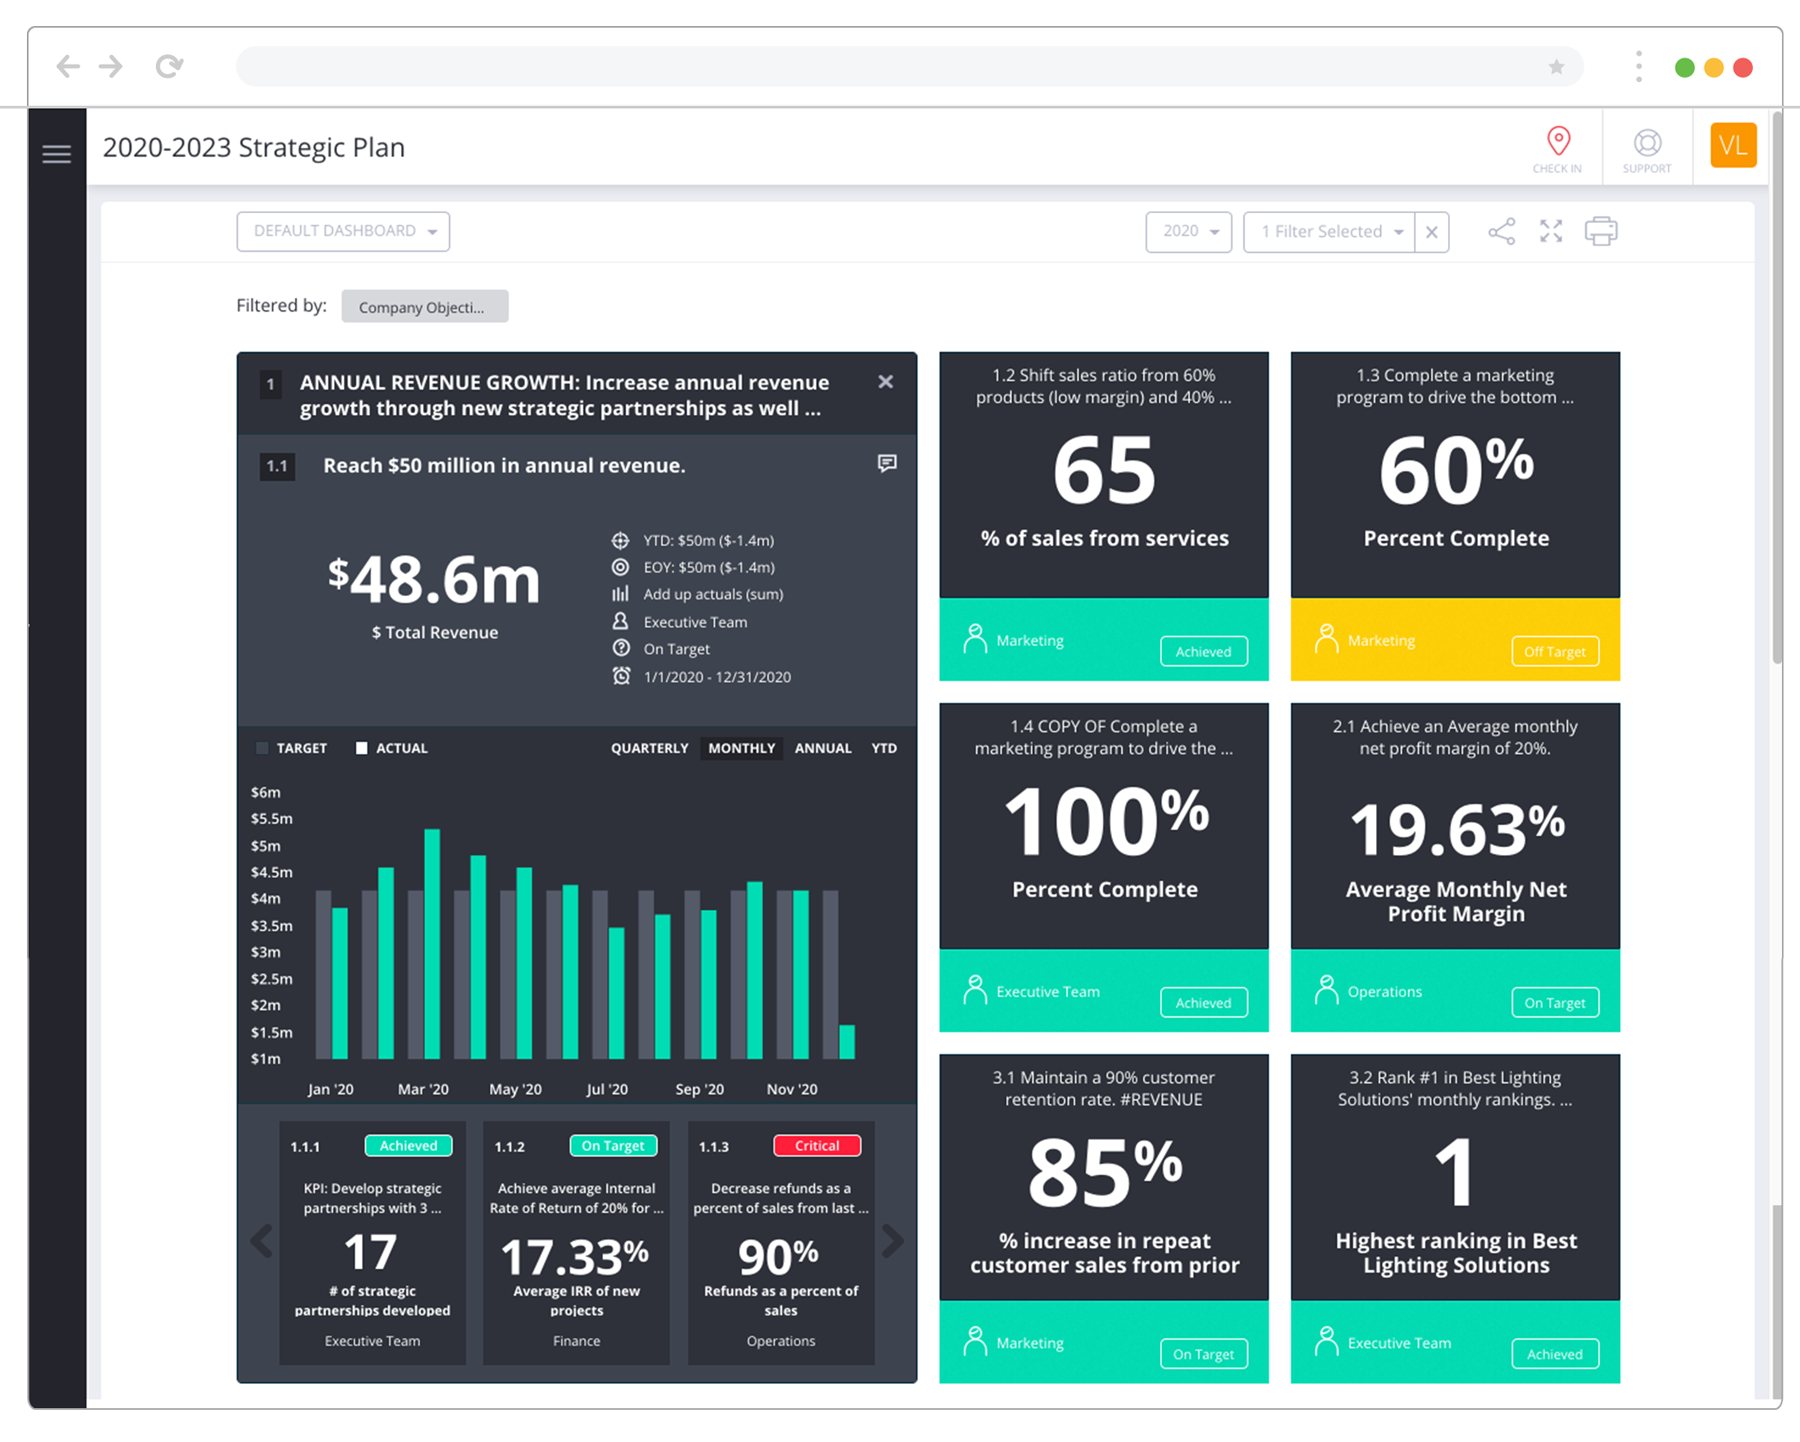 Real-Time Performance Dashboards Bring Results to Life—Interactive displays of your data provide insight into the key performance indicators driving your success. When you adapt your plan, the dynamic dashboard reflects changes in real-time.